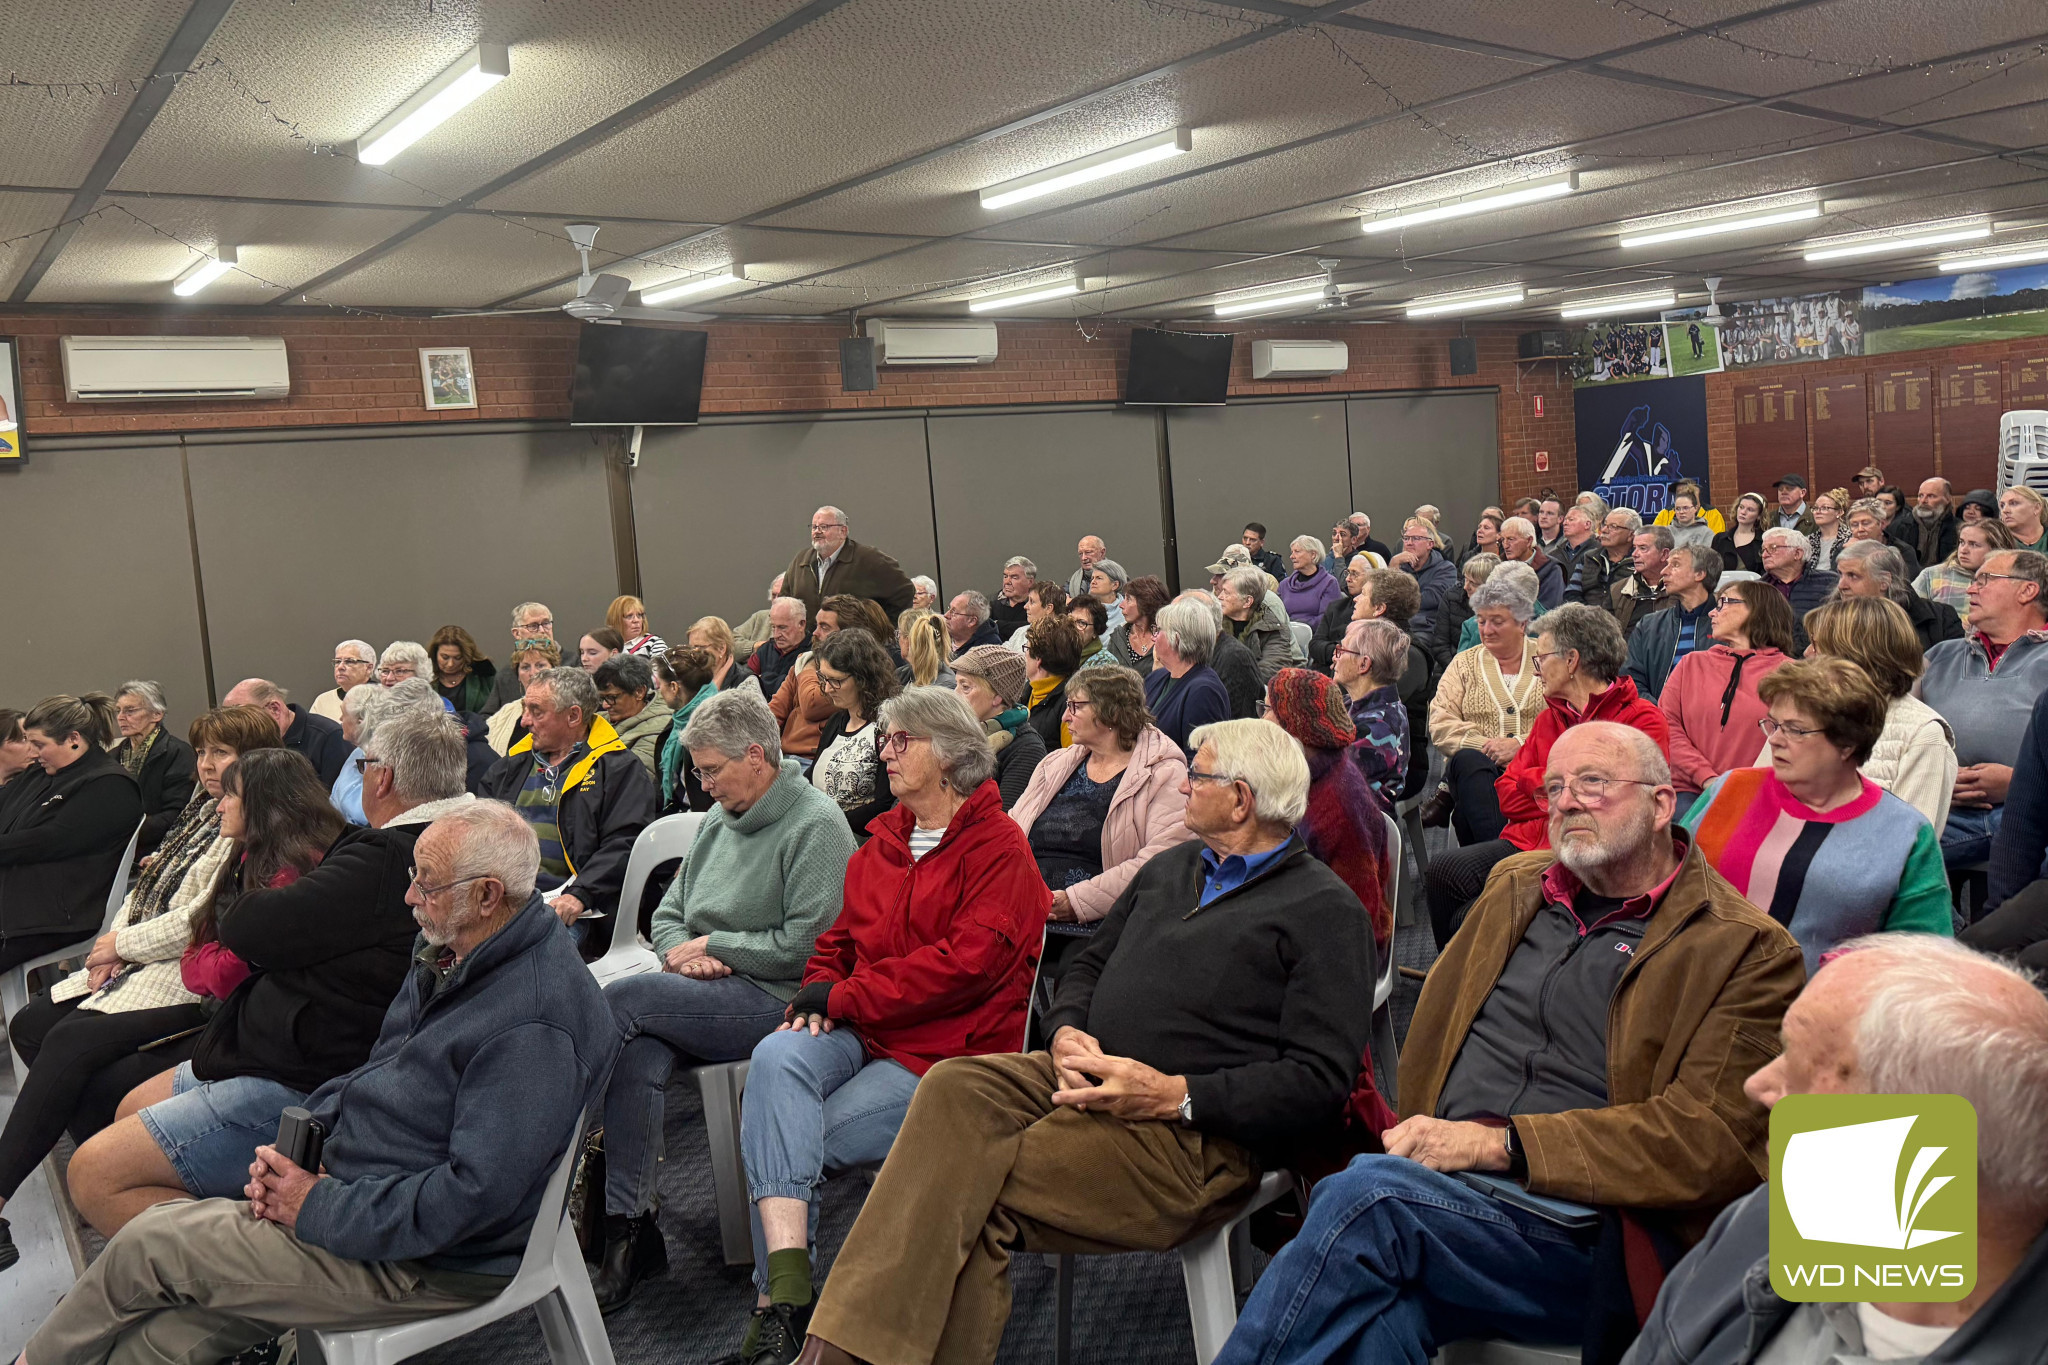 Campaign: Timboon and district residents turned out in force to a community meeting last week in a bid to campaign to ensure TDHS remains an independent health service.